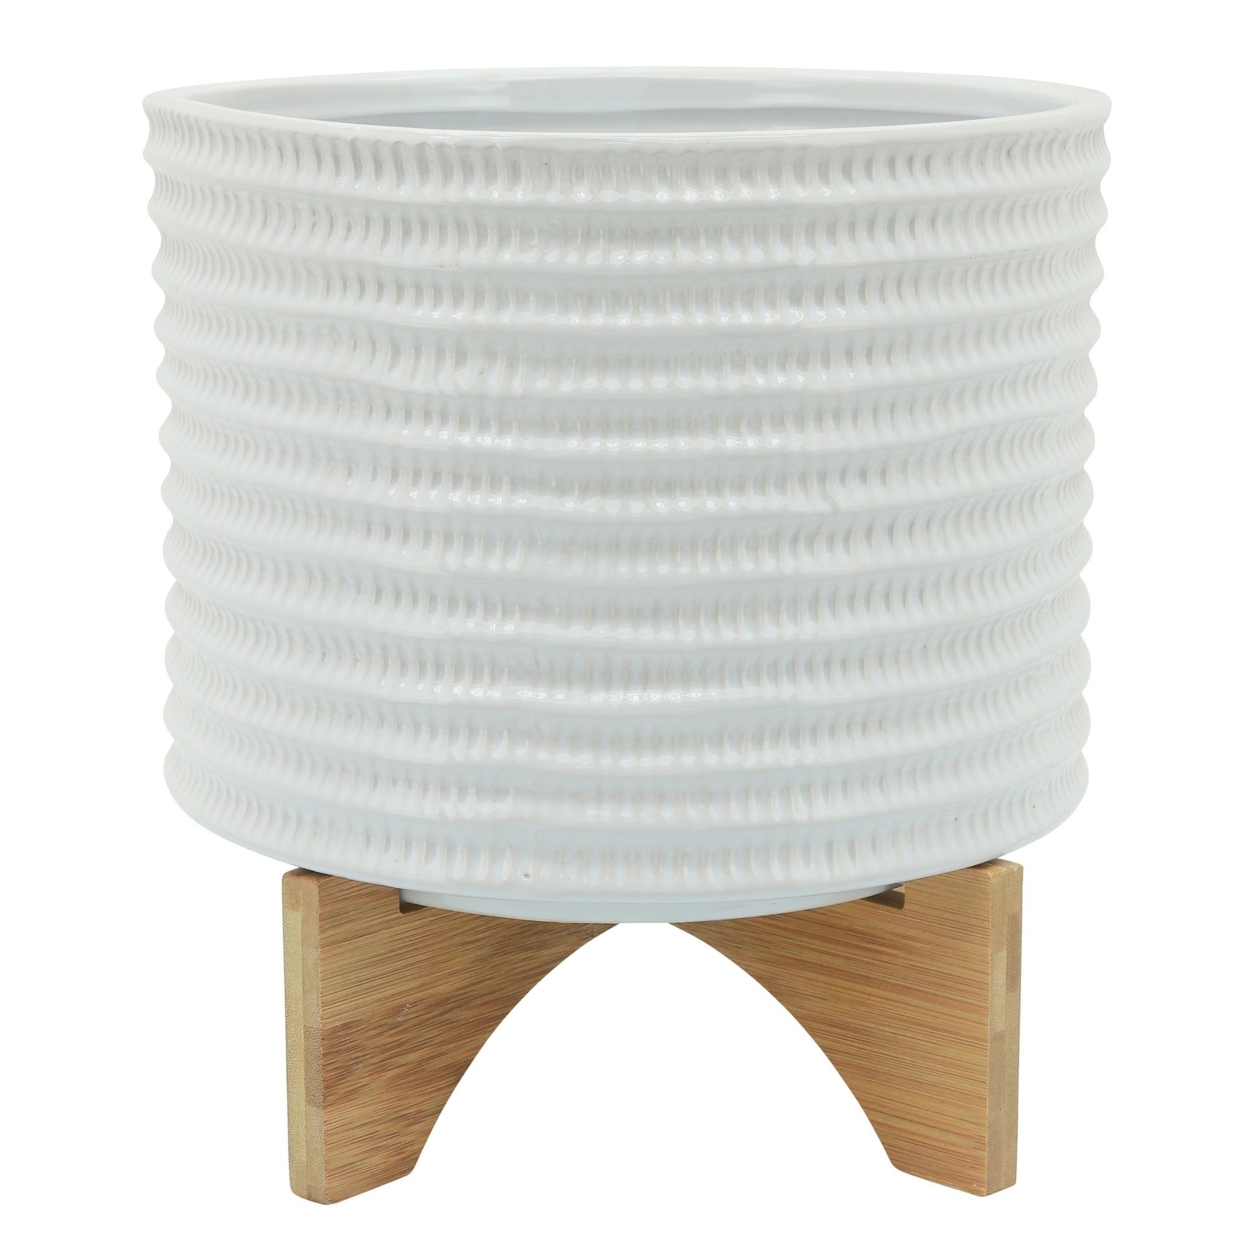 Ceramic Planter With Textured Pattern And Wooden Stand, White- Saltoro Sherpi